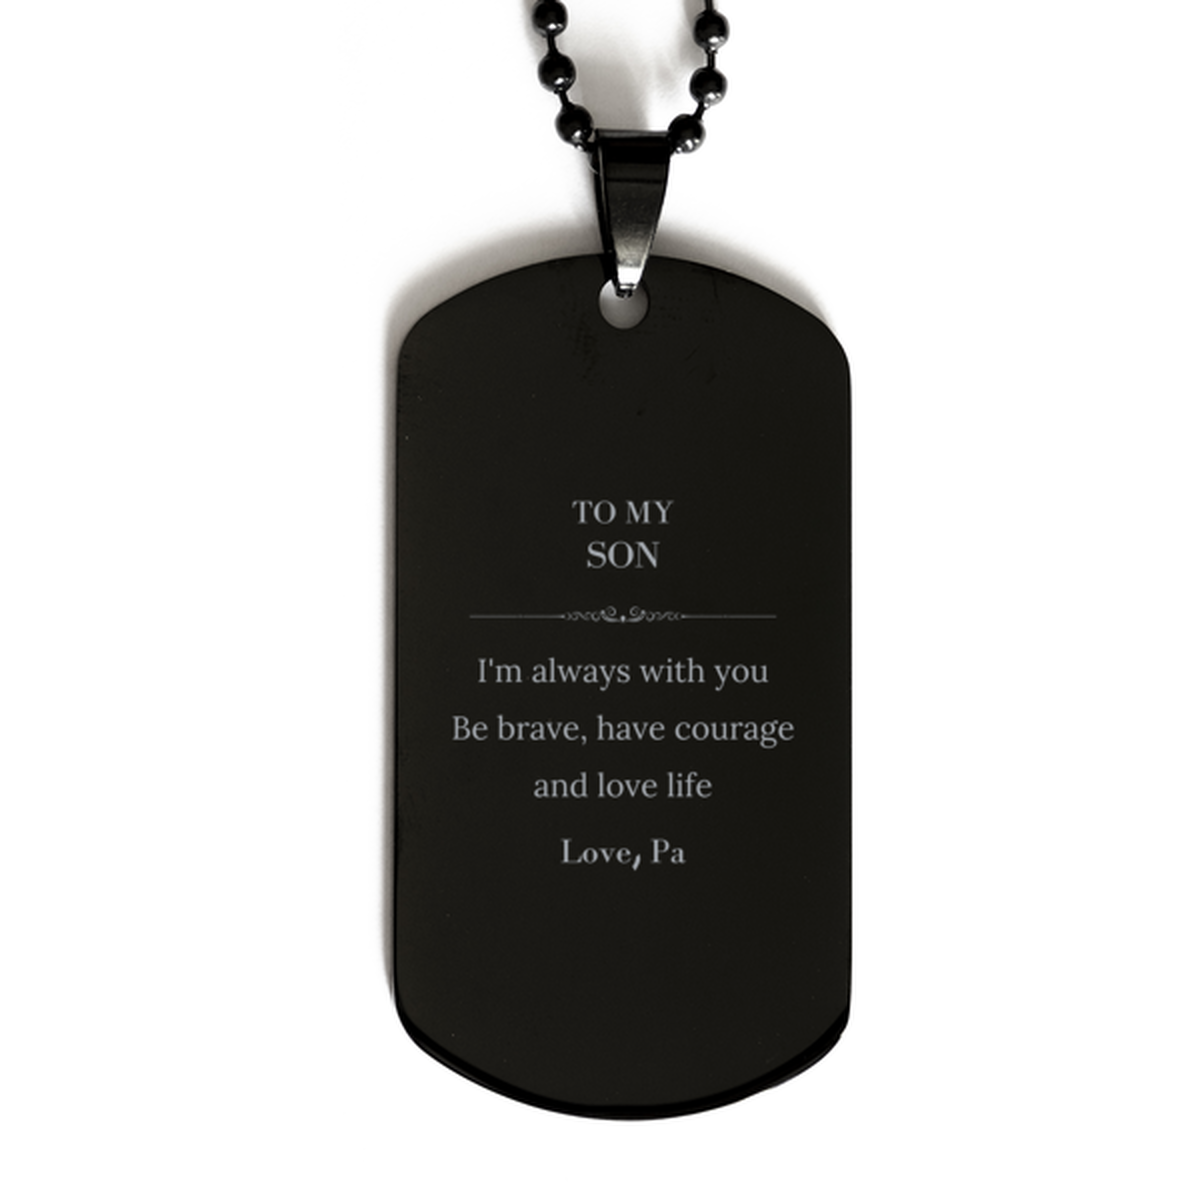 To My Son Gifts from Pa, Unique Black Dog Tag Inspirational Christmas Birthday Graduation Gifts for Son I'm always with you. Be brave, have courage and love life. Love, Pa